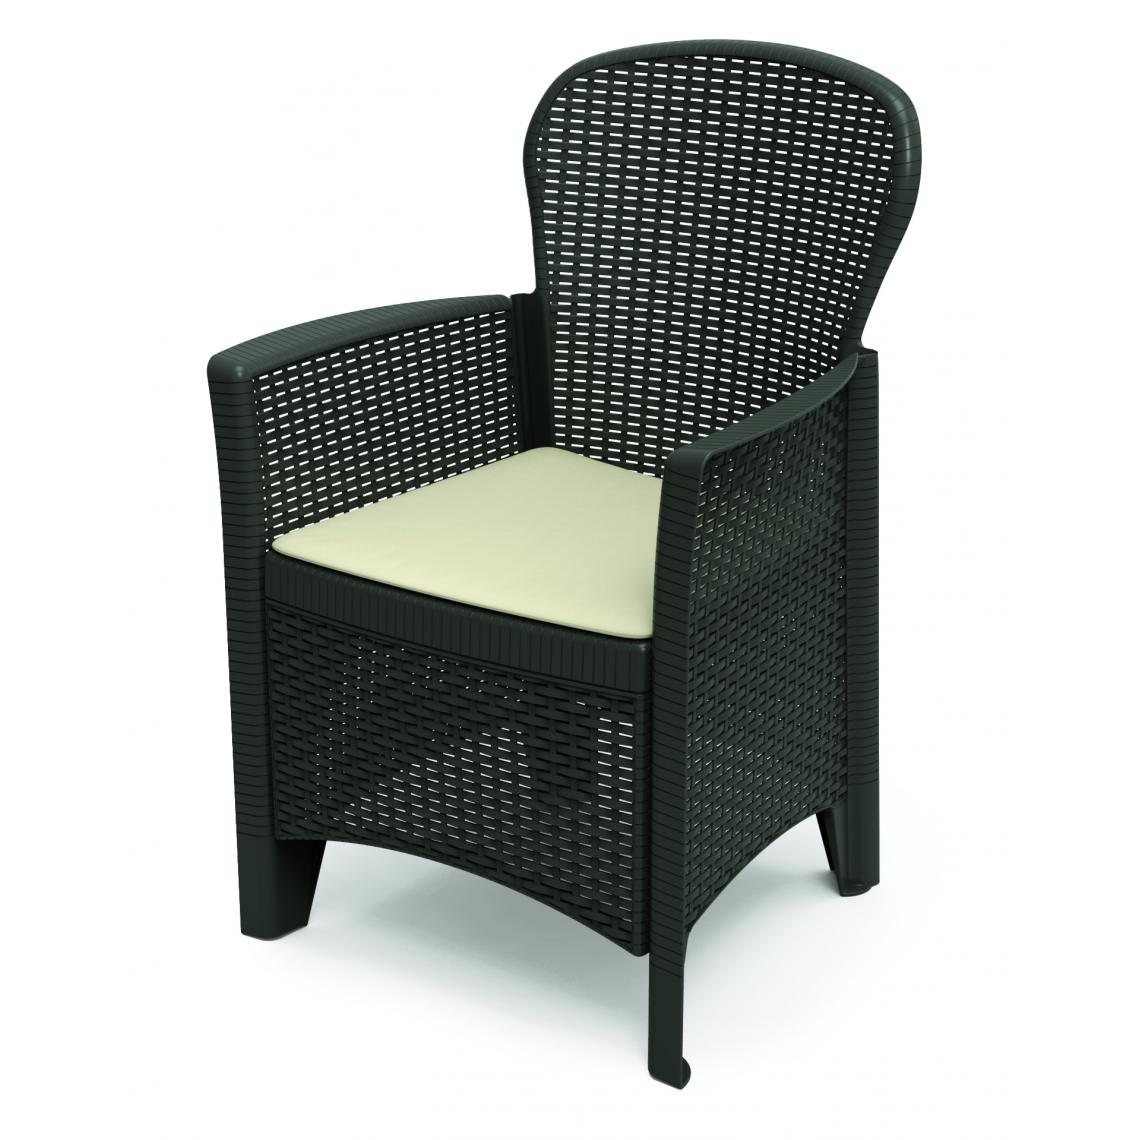 Alter - Fauteuil modulable effet rotin, Made in Italy, 60 x 58 x 89 cm, Couleur anthracite - Chaises